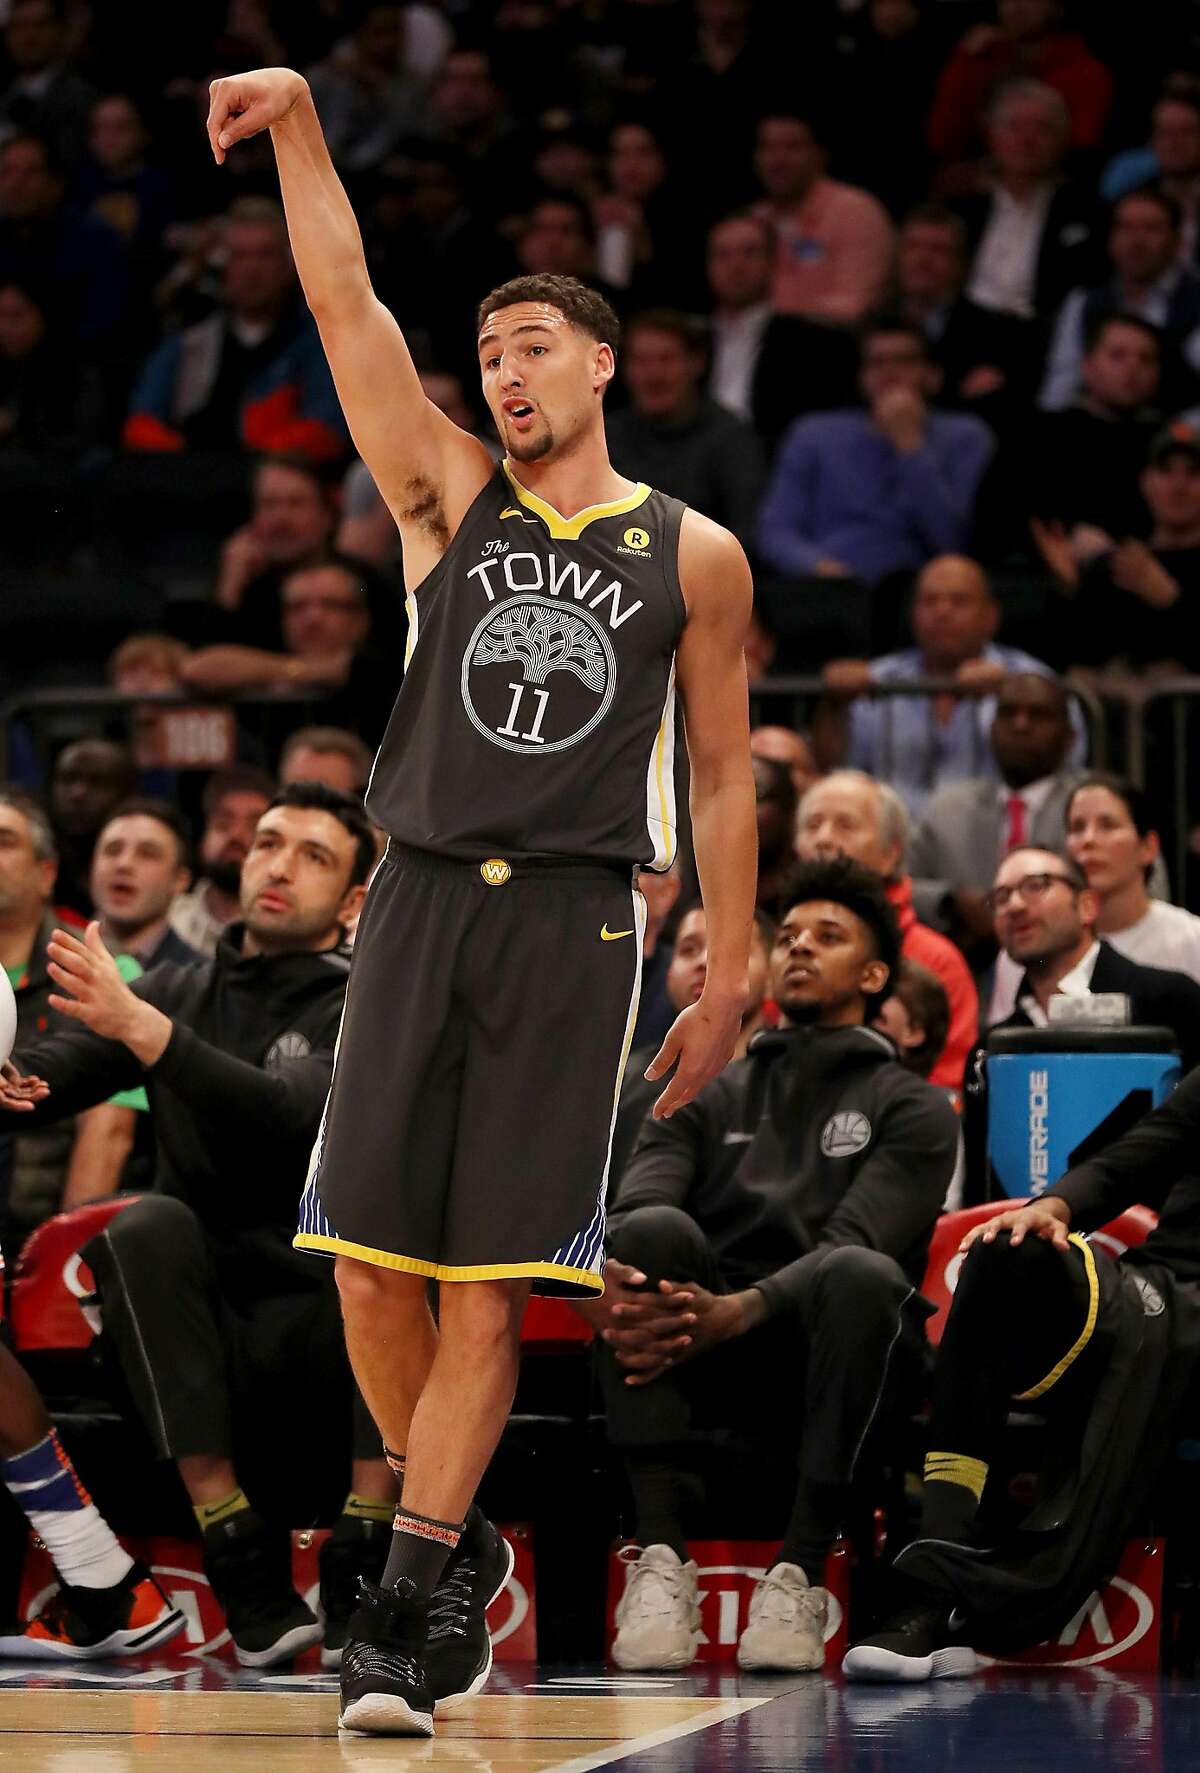 NEW YORK, NY - FEBRUARY 26: Klay Thompson #11 of the Golden State Warriors reacts to his three point shot in the first quarter against the New York Knicks at Madison Square Garden on February 26,2018 in New York City. NOTE TO USER: User expressly acknowledges and agrees that, by downloading and or using this Photograph, user is consenting to the terms and conditions of the Getty Images License Agreement (Photo by Elsa/Getty Images)